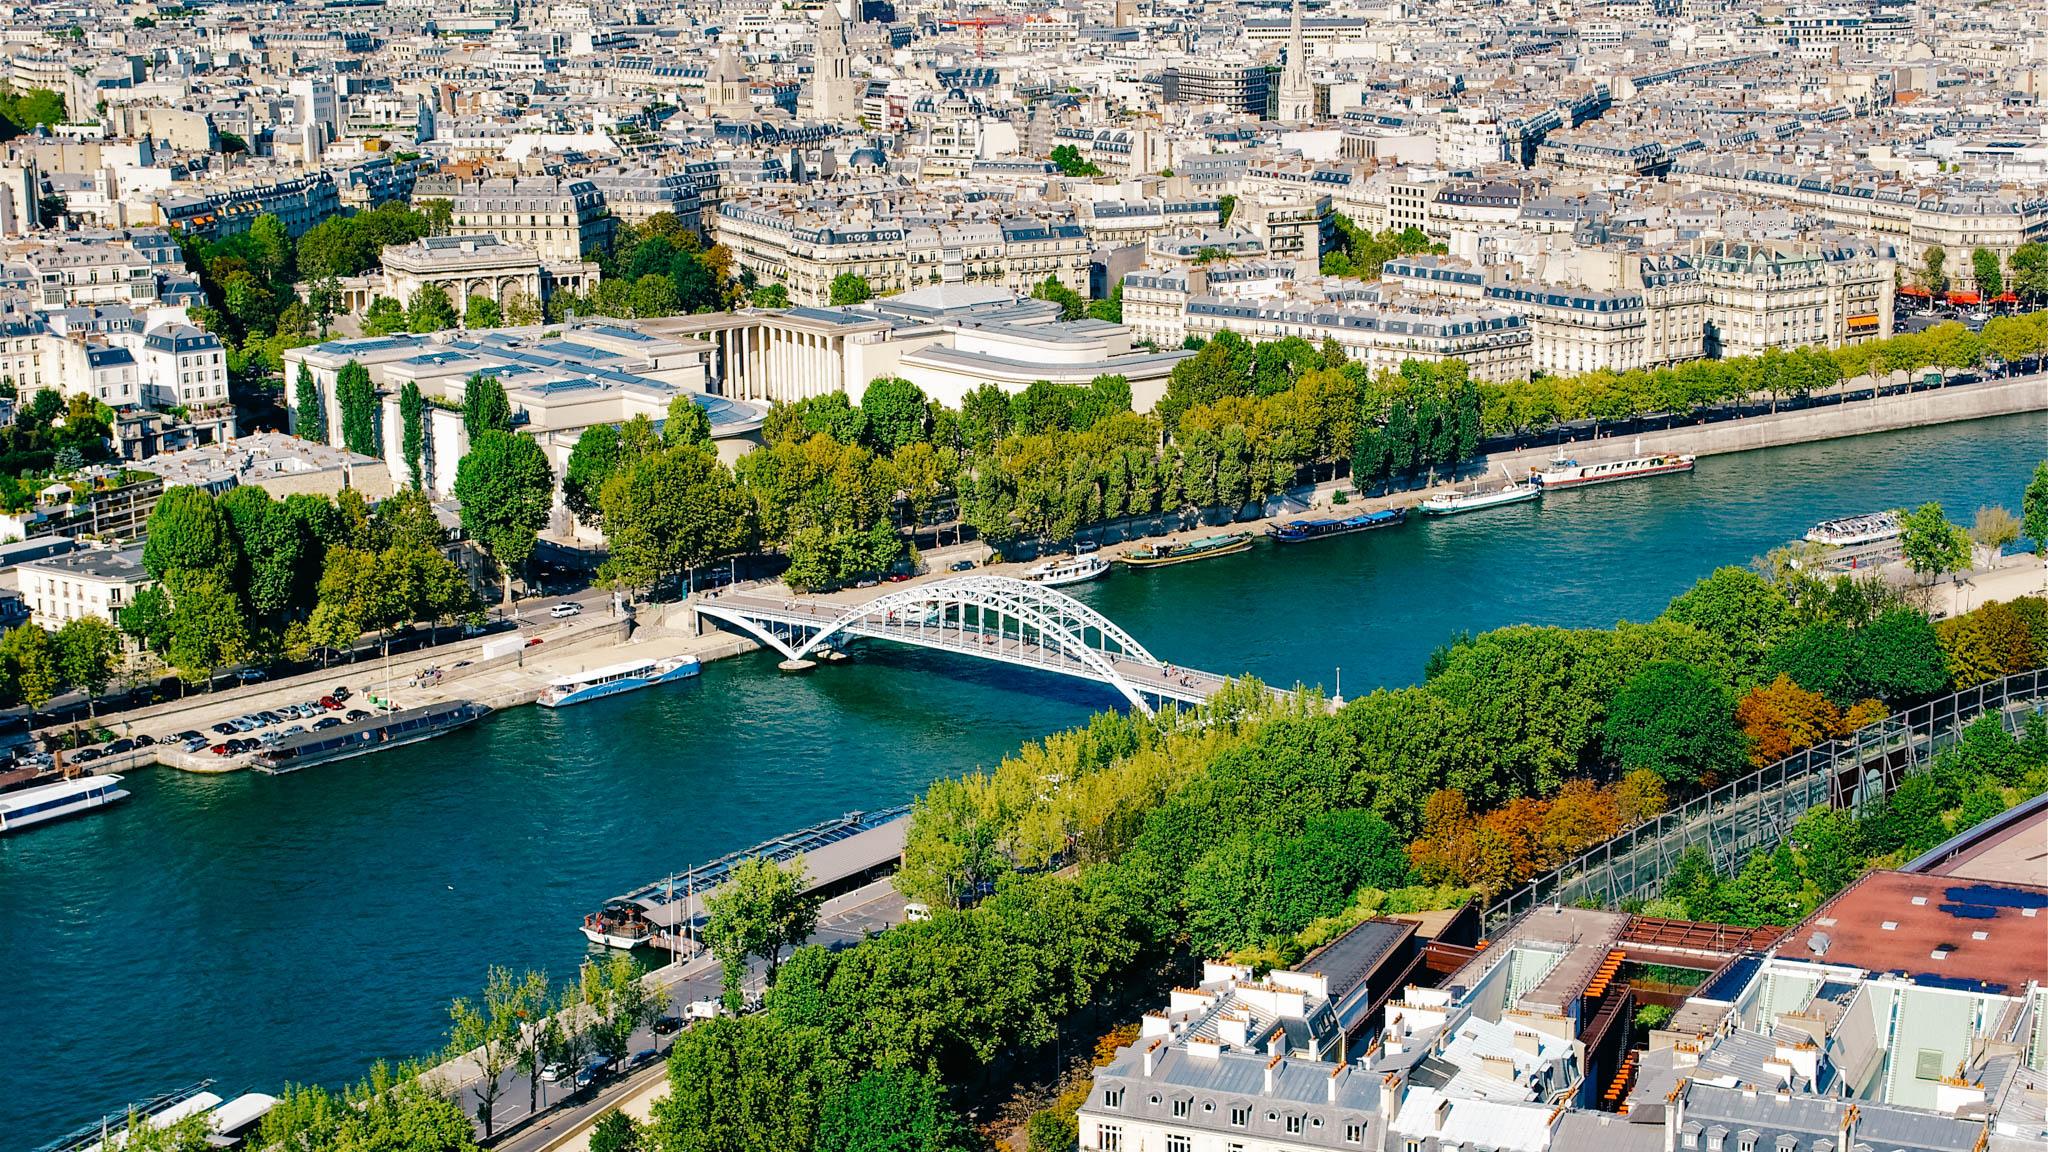 Cruise on the River Seine